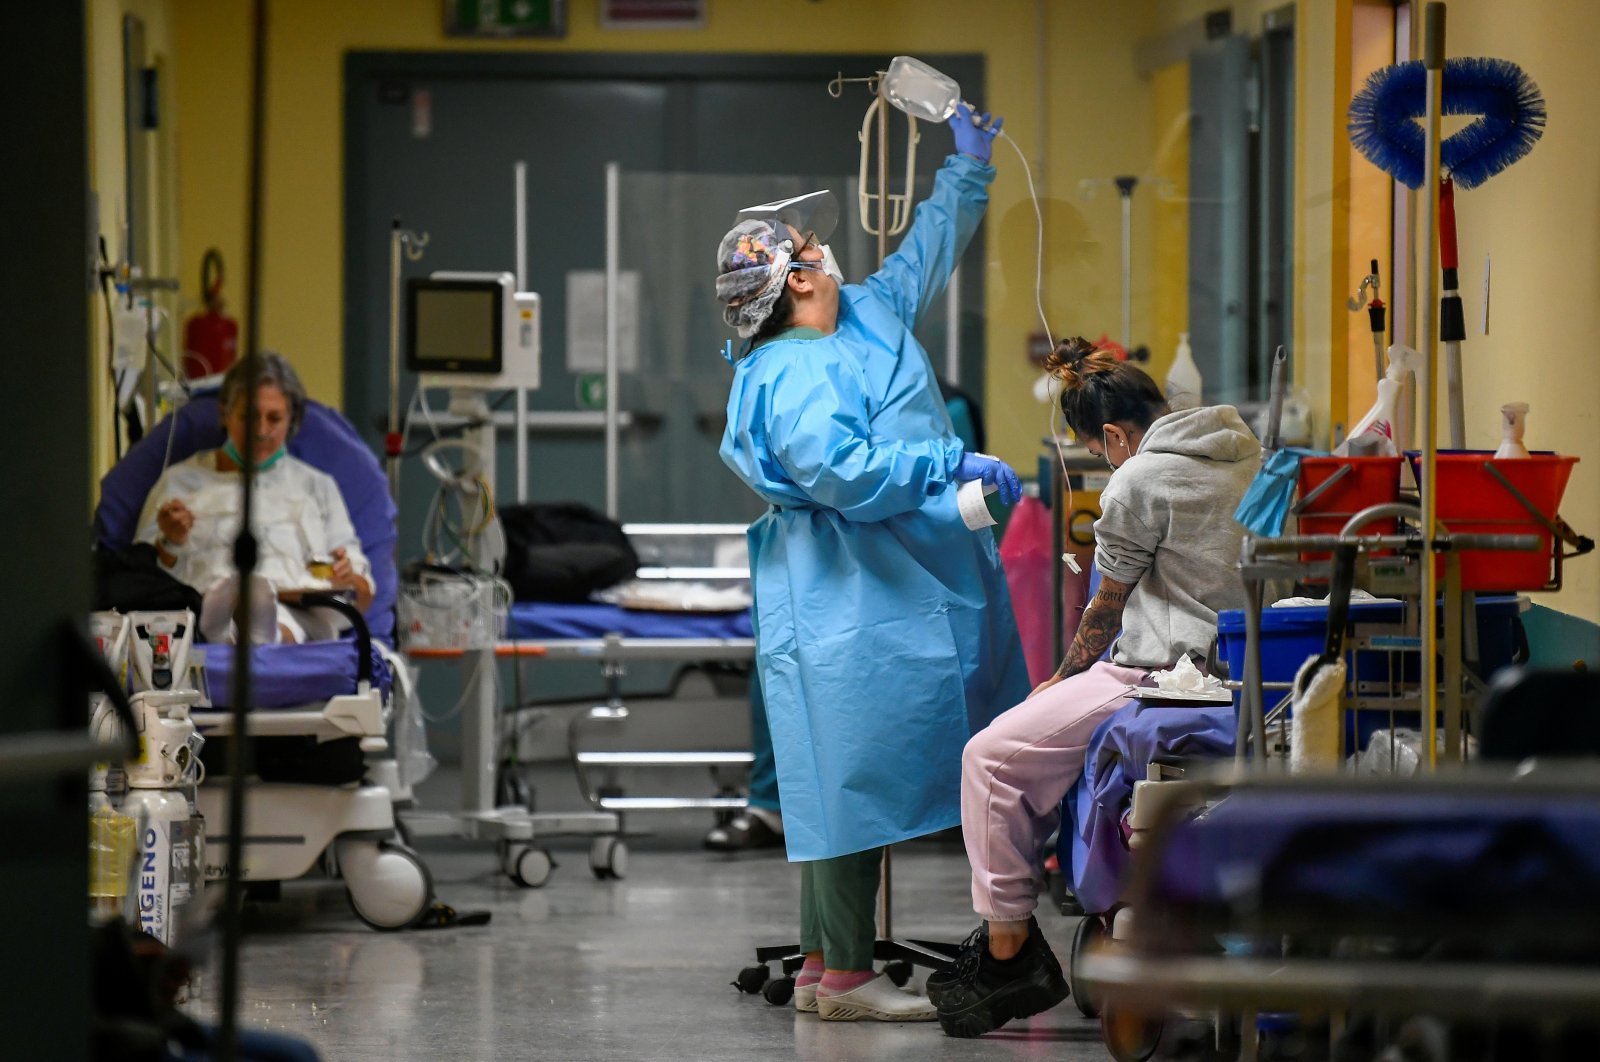 A medical worker is seen as patients are treated in the Maggiore di Lodi hospital, Lodi, Lombardy, Italy, Nov. 13, 2020. (Reuters Photo)